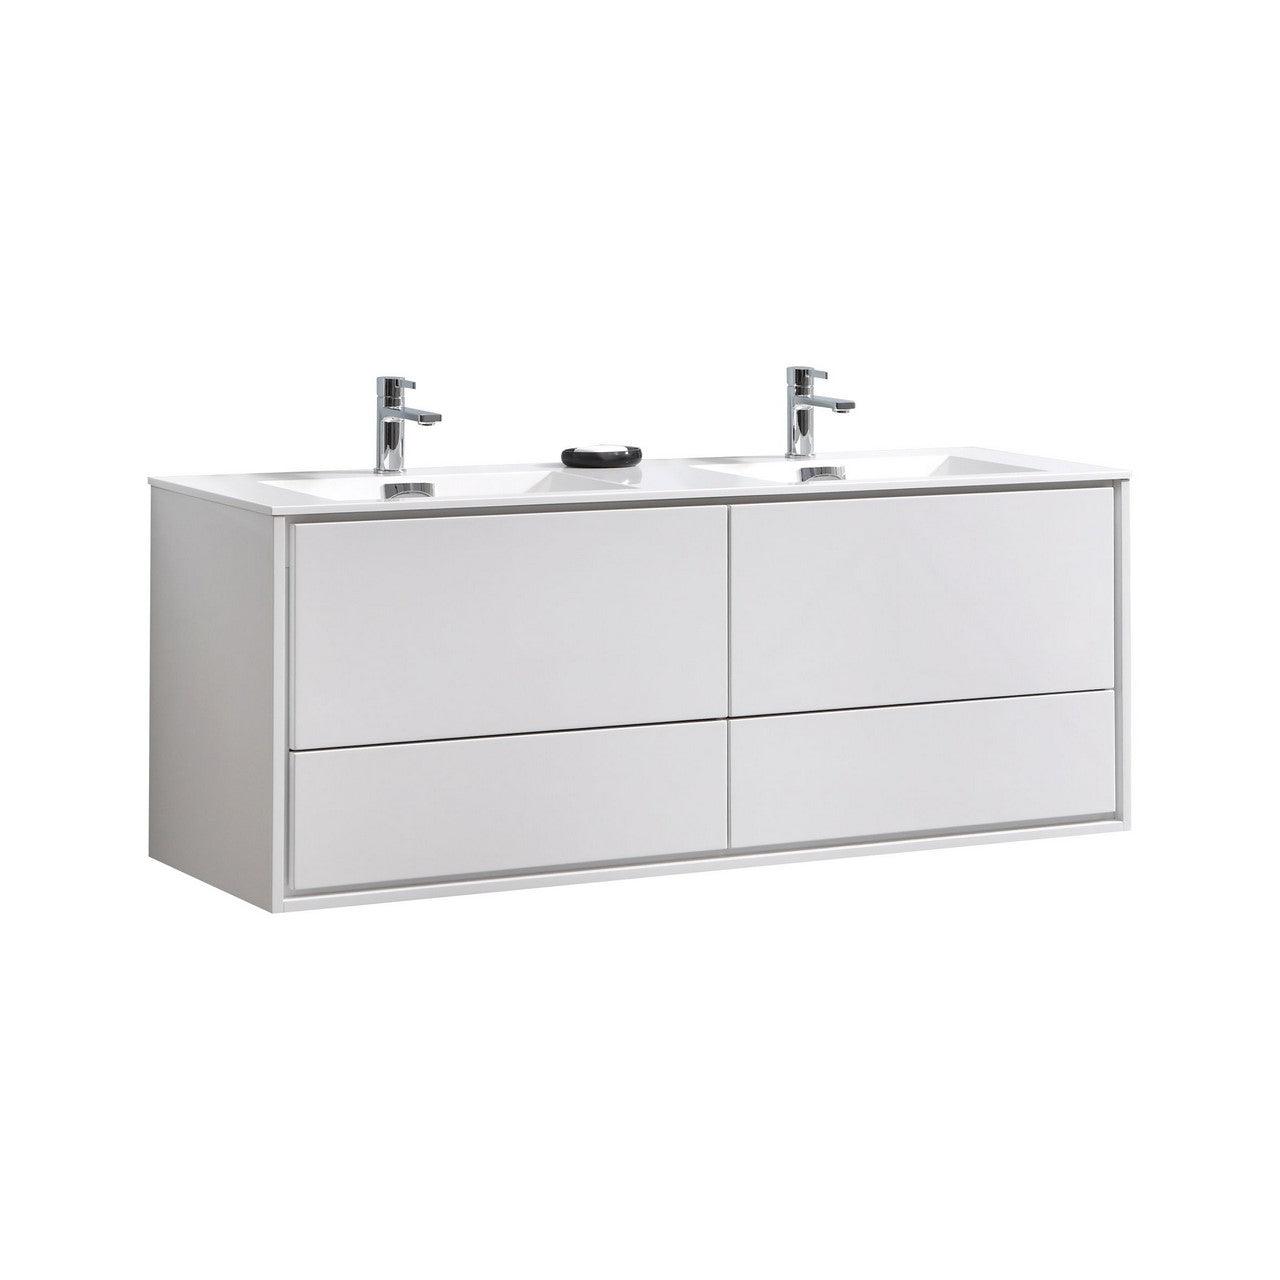 DeLusso 60" Double Sink Wall Mount Modern Bathroom Vanity - Home and Bath Depot